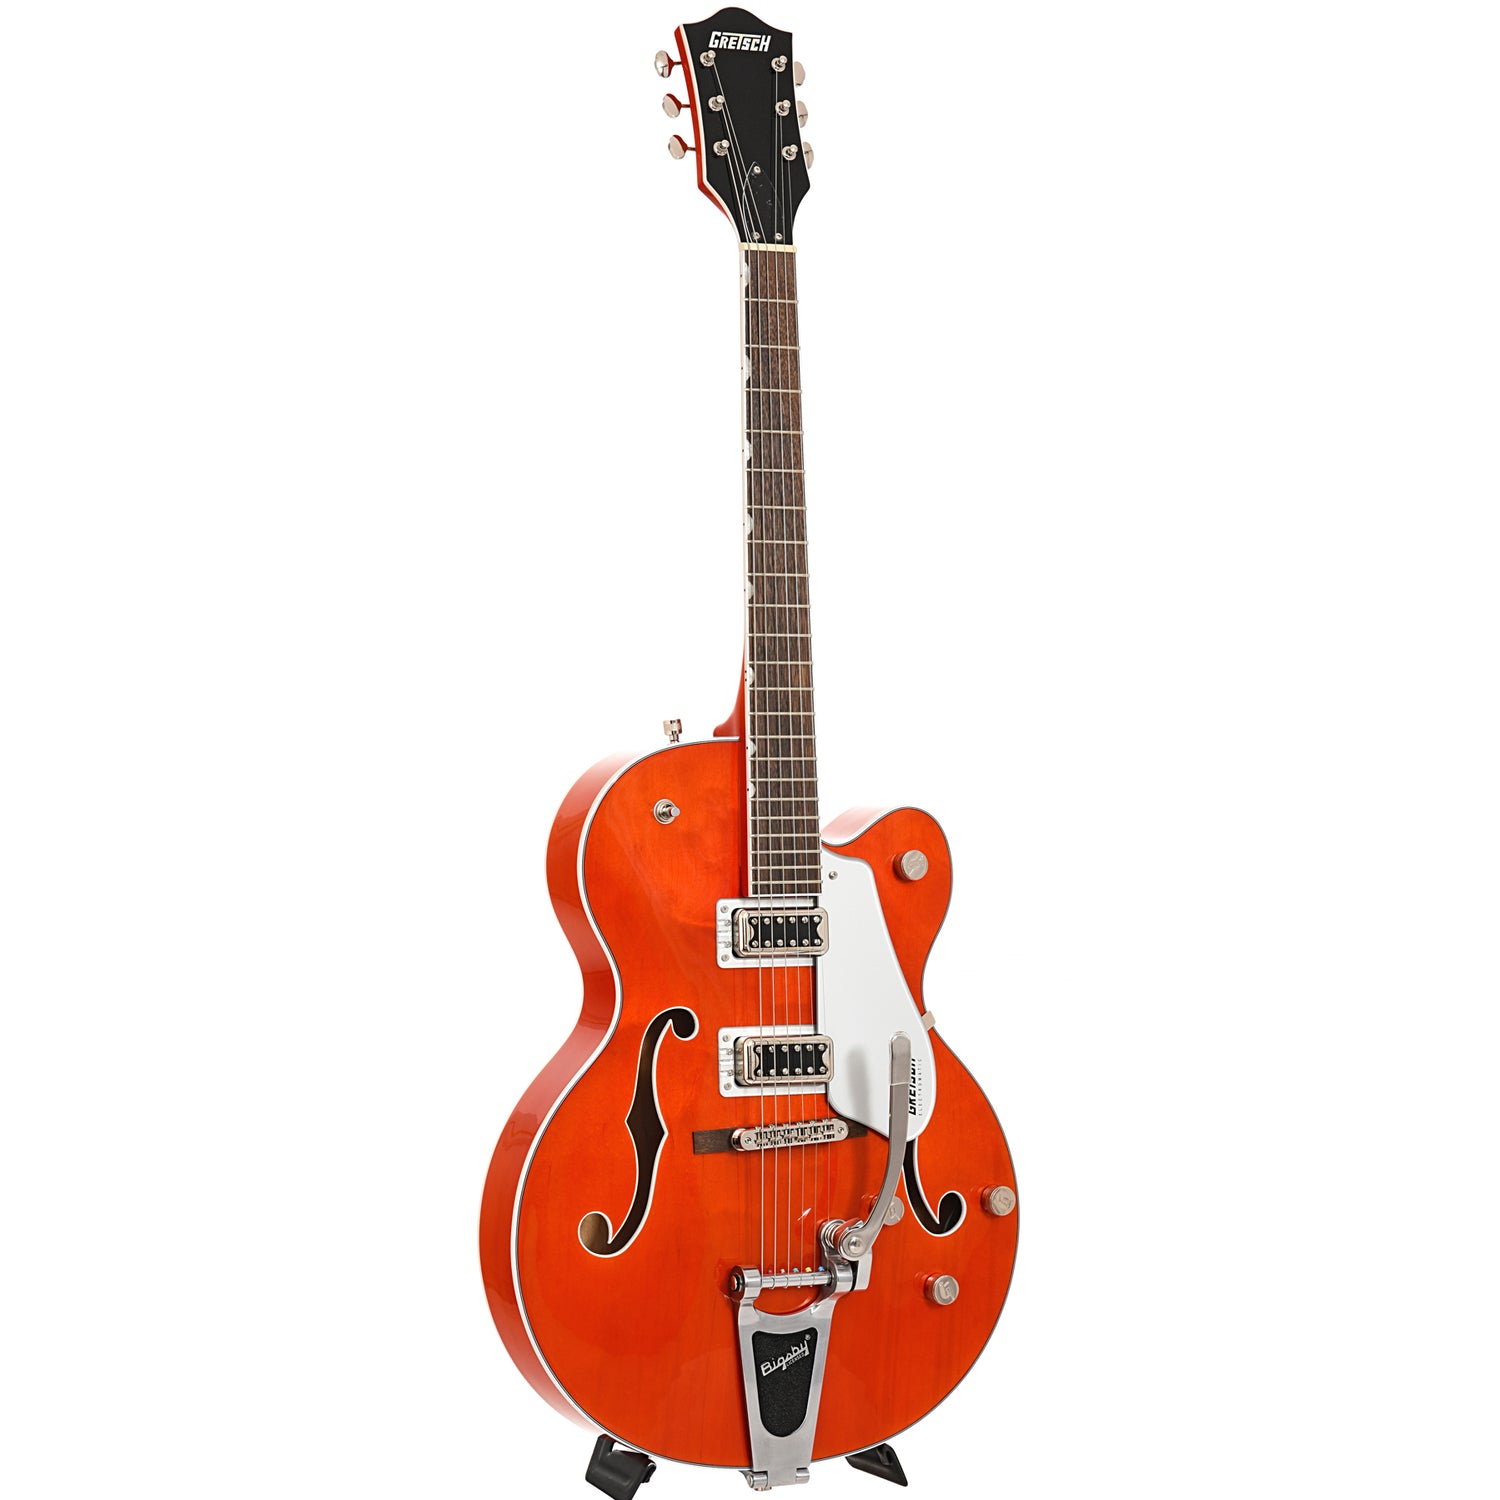 Image 11 of Gretsch G5420T Electromatic Classic Hollow Body Single Cut with Bigbsy, Orange Stain - SKU# G5420T-ORG : Product Type Hollow Body Electric Guitars : Elderly Instruments